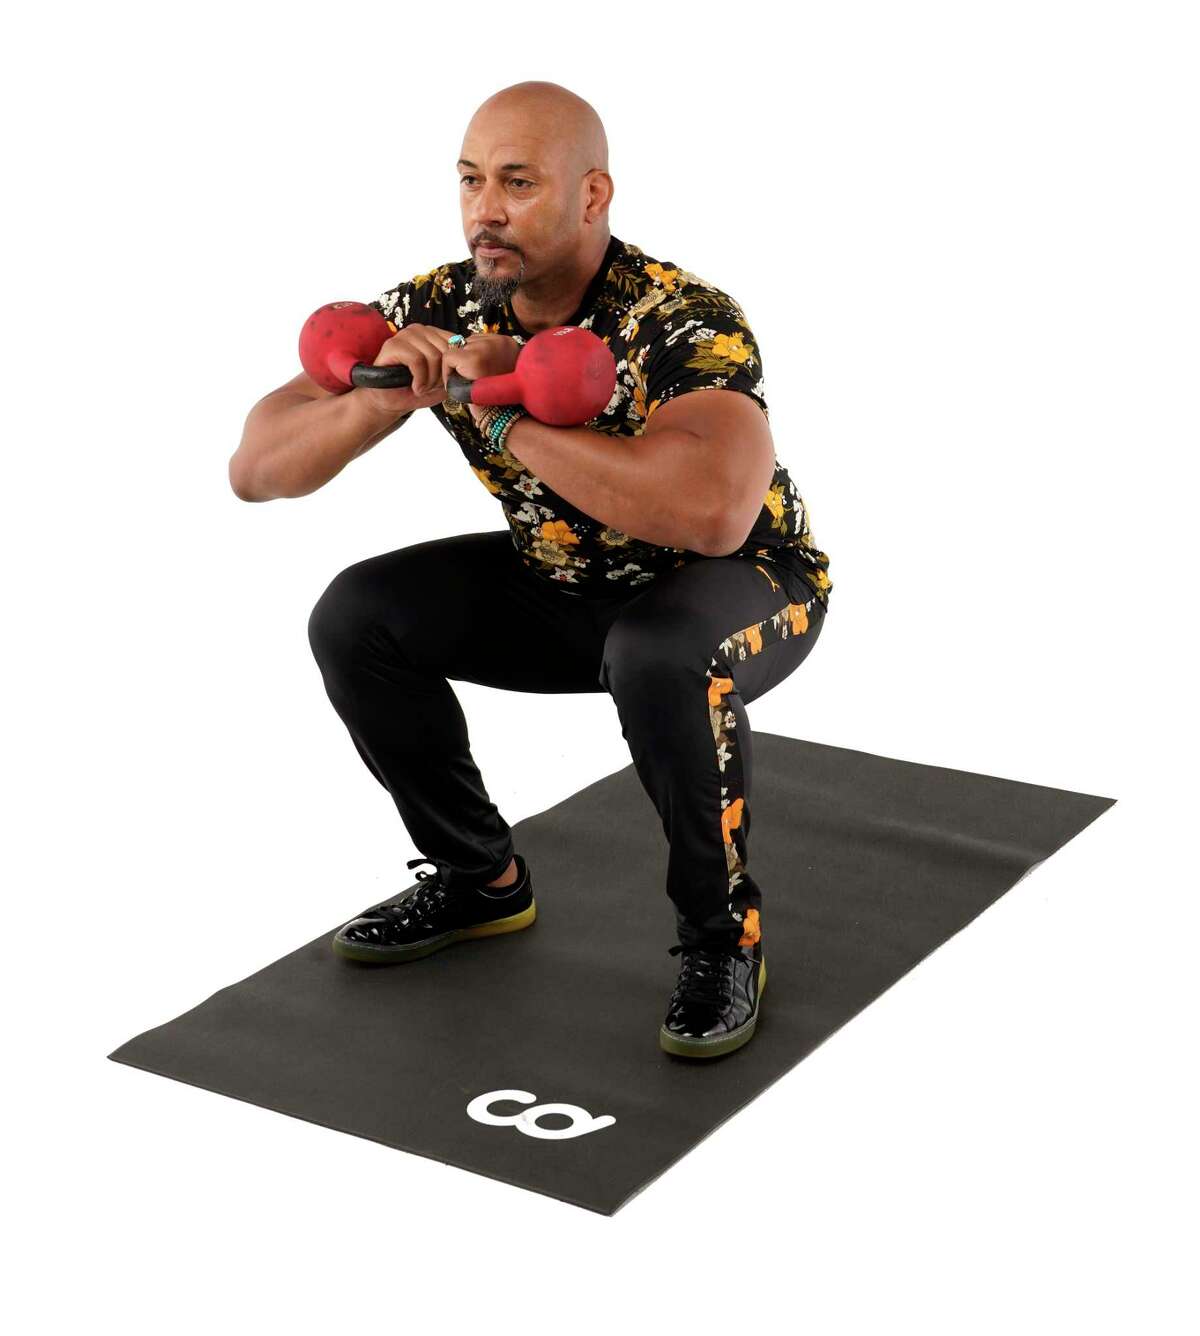 Lower your hips into a squat, keeping your torso erect. Press through your heels at the bottom of the squat., and return to the top position.